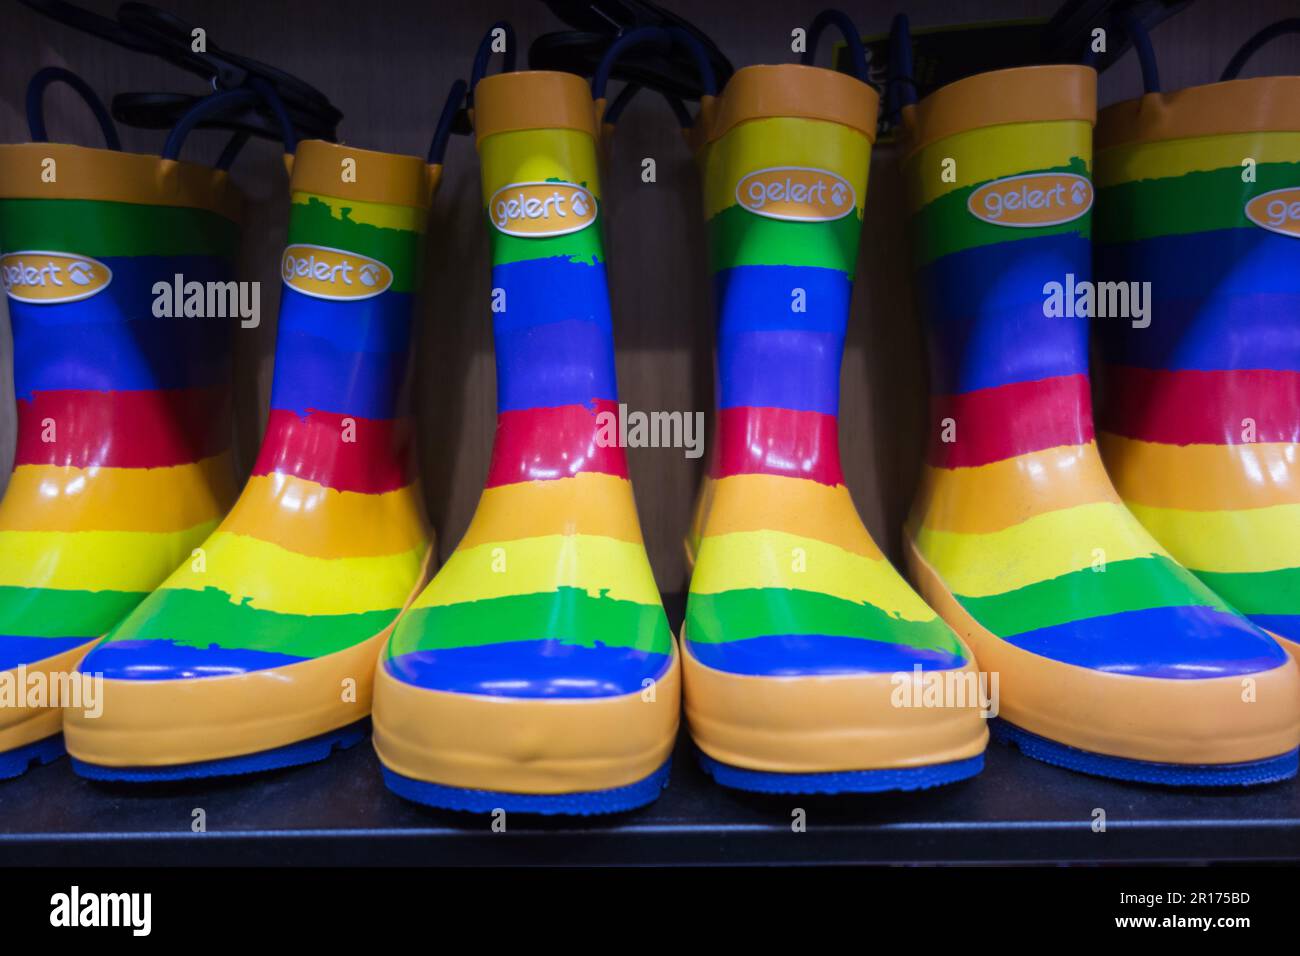 Rainbow coloured Gelert plastic boots on display in a shop in London, England, UK Stock Photo